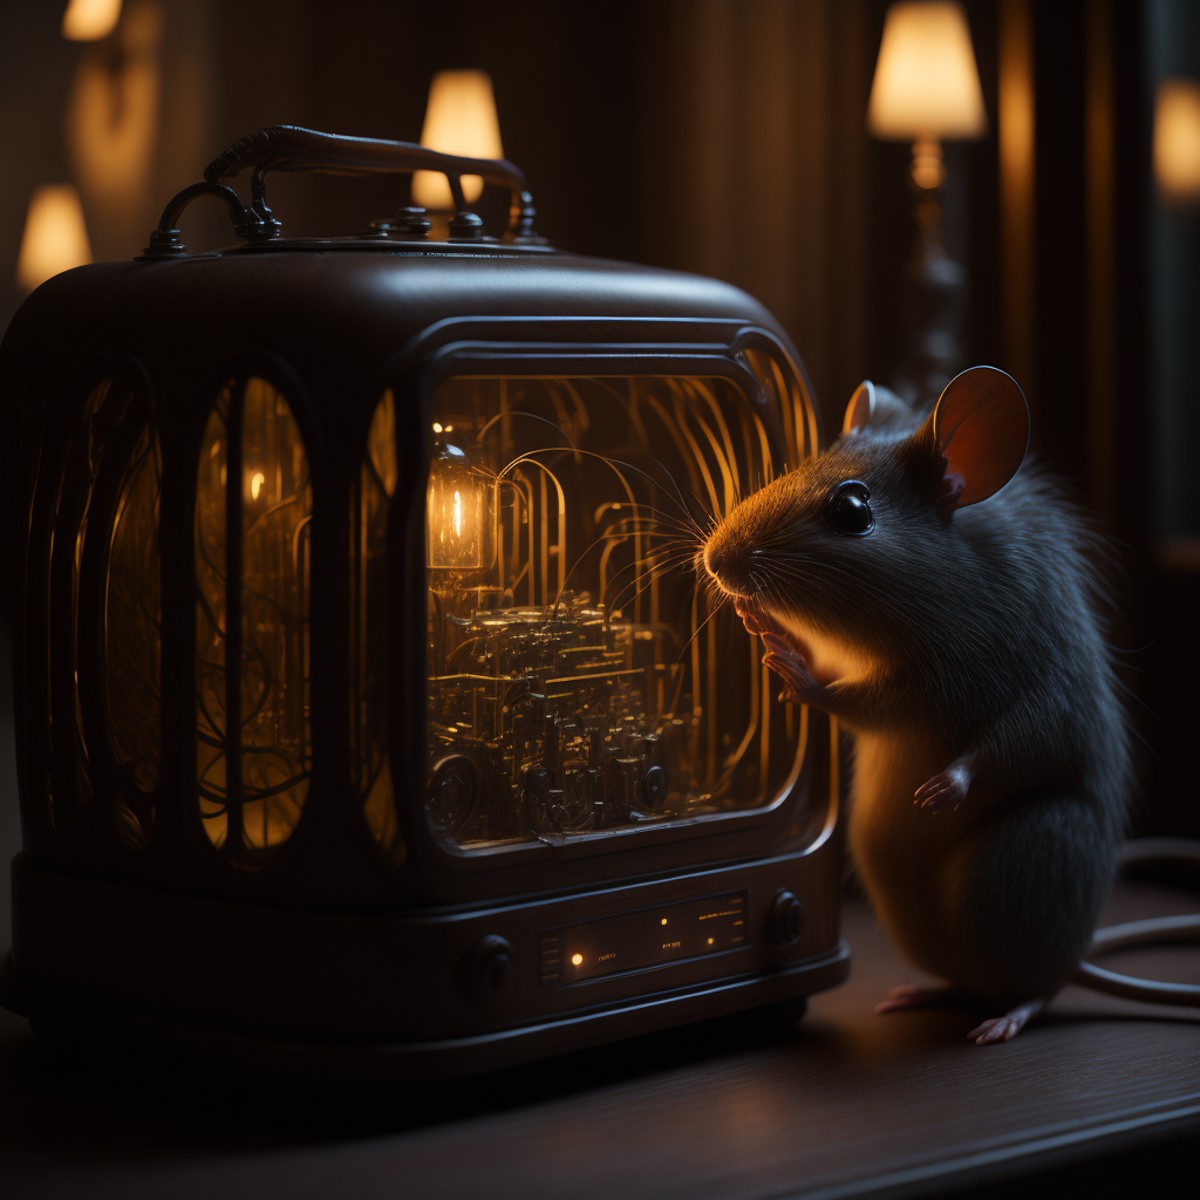 A tiny furry mouse looking at a gleaming art deco 1930s radio made of polished wood, glowing dial, evening lamplight, play...